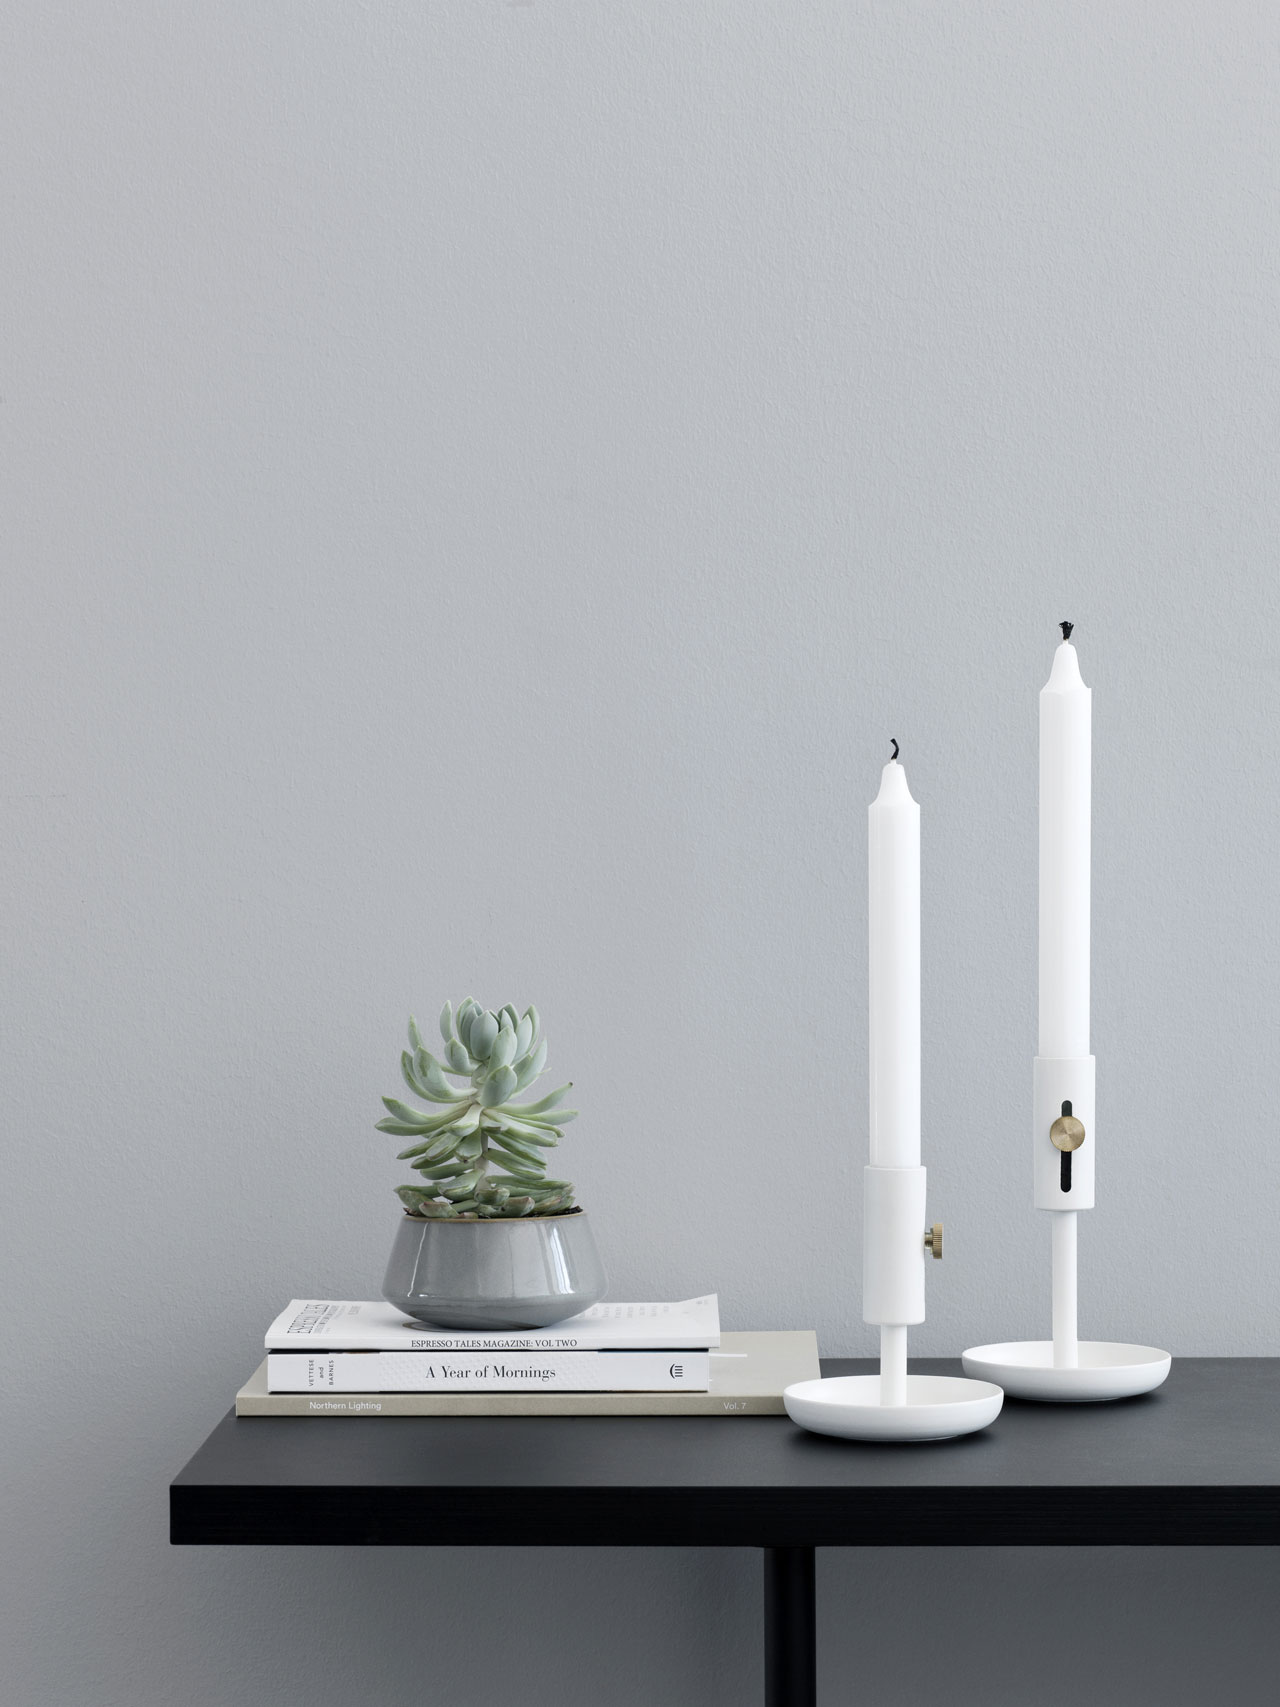 Granny candlestick by Rudi Wulff for Northen Lighting. Photo by Chris Tonnesen.